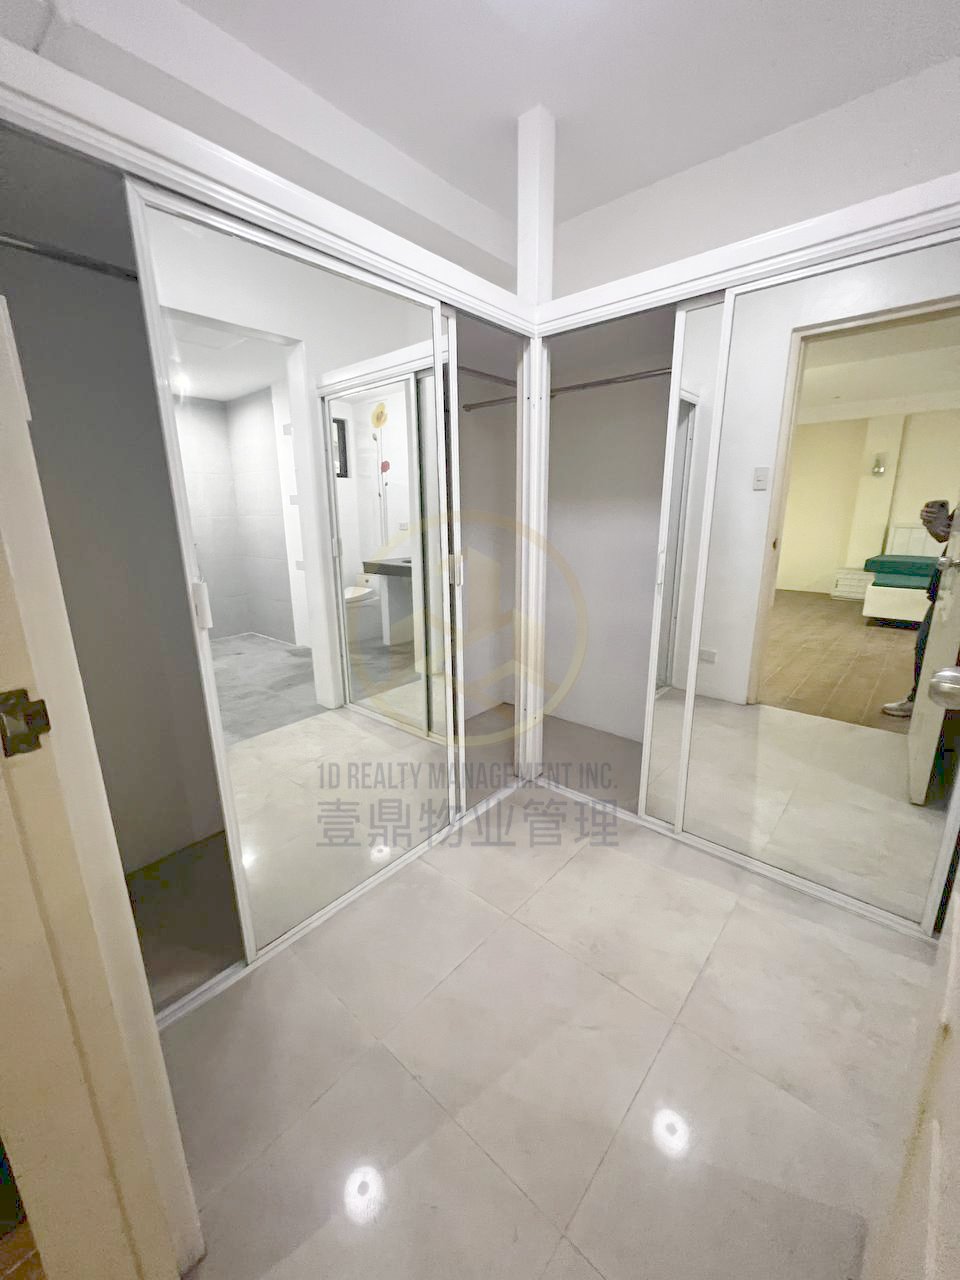 FOR LEASE 2BR - LPL MANOR - Leviste St. Makati City